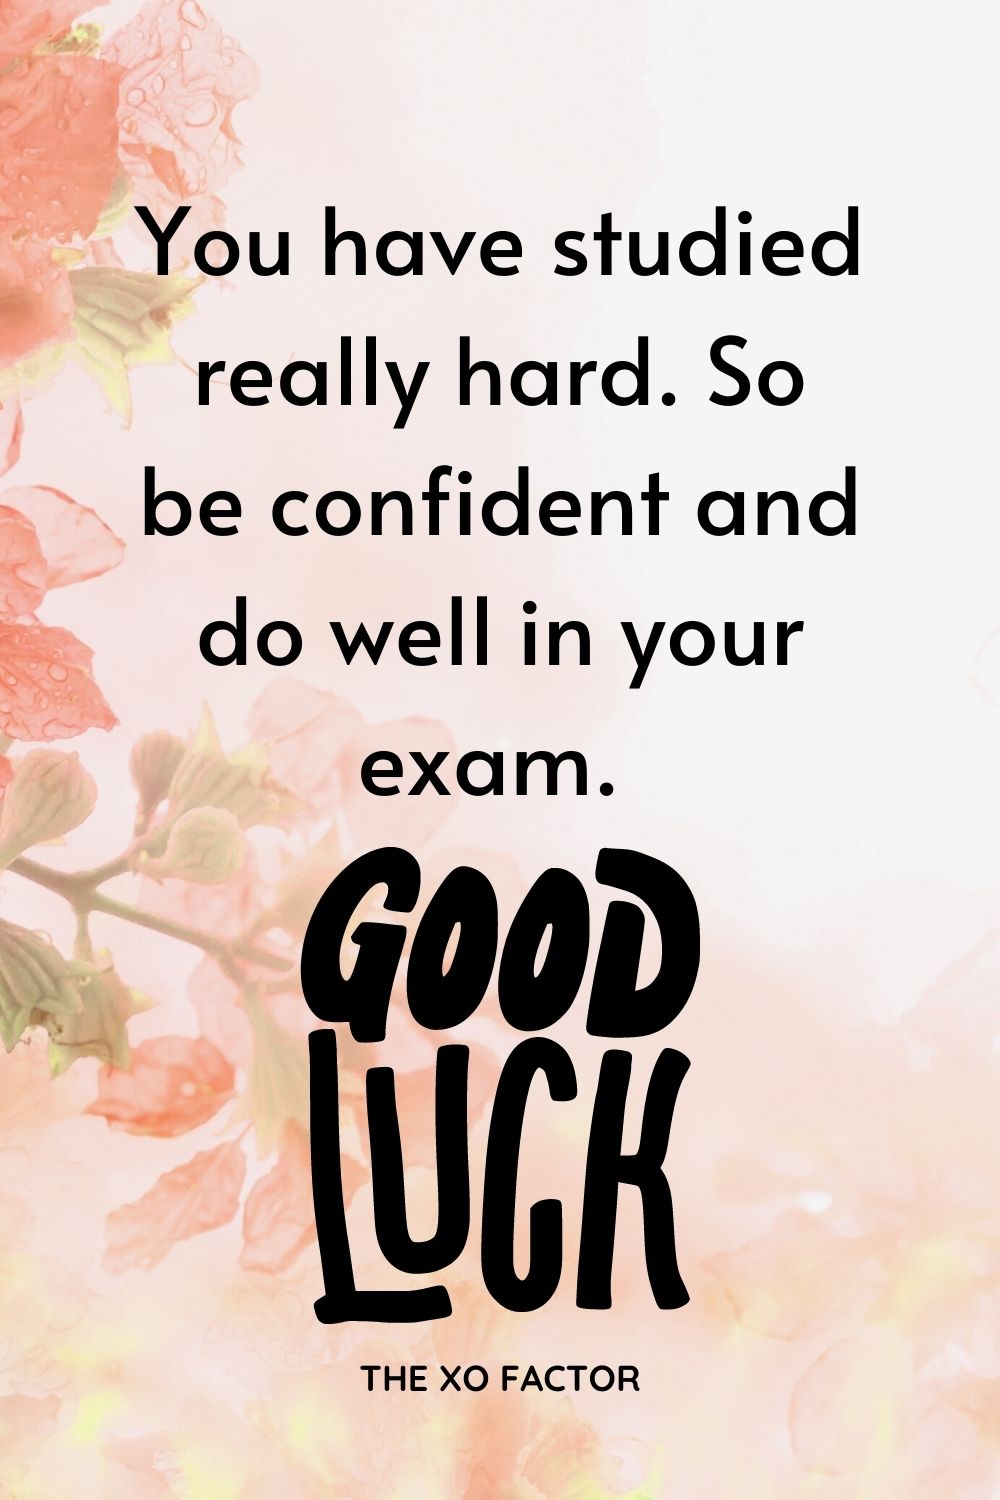 You have studied really hard. So be confident and do well in your exam. Good luck!